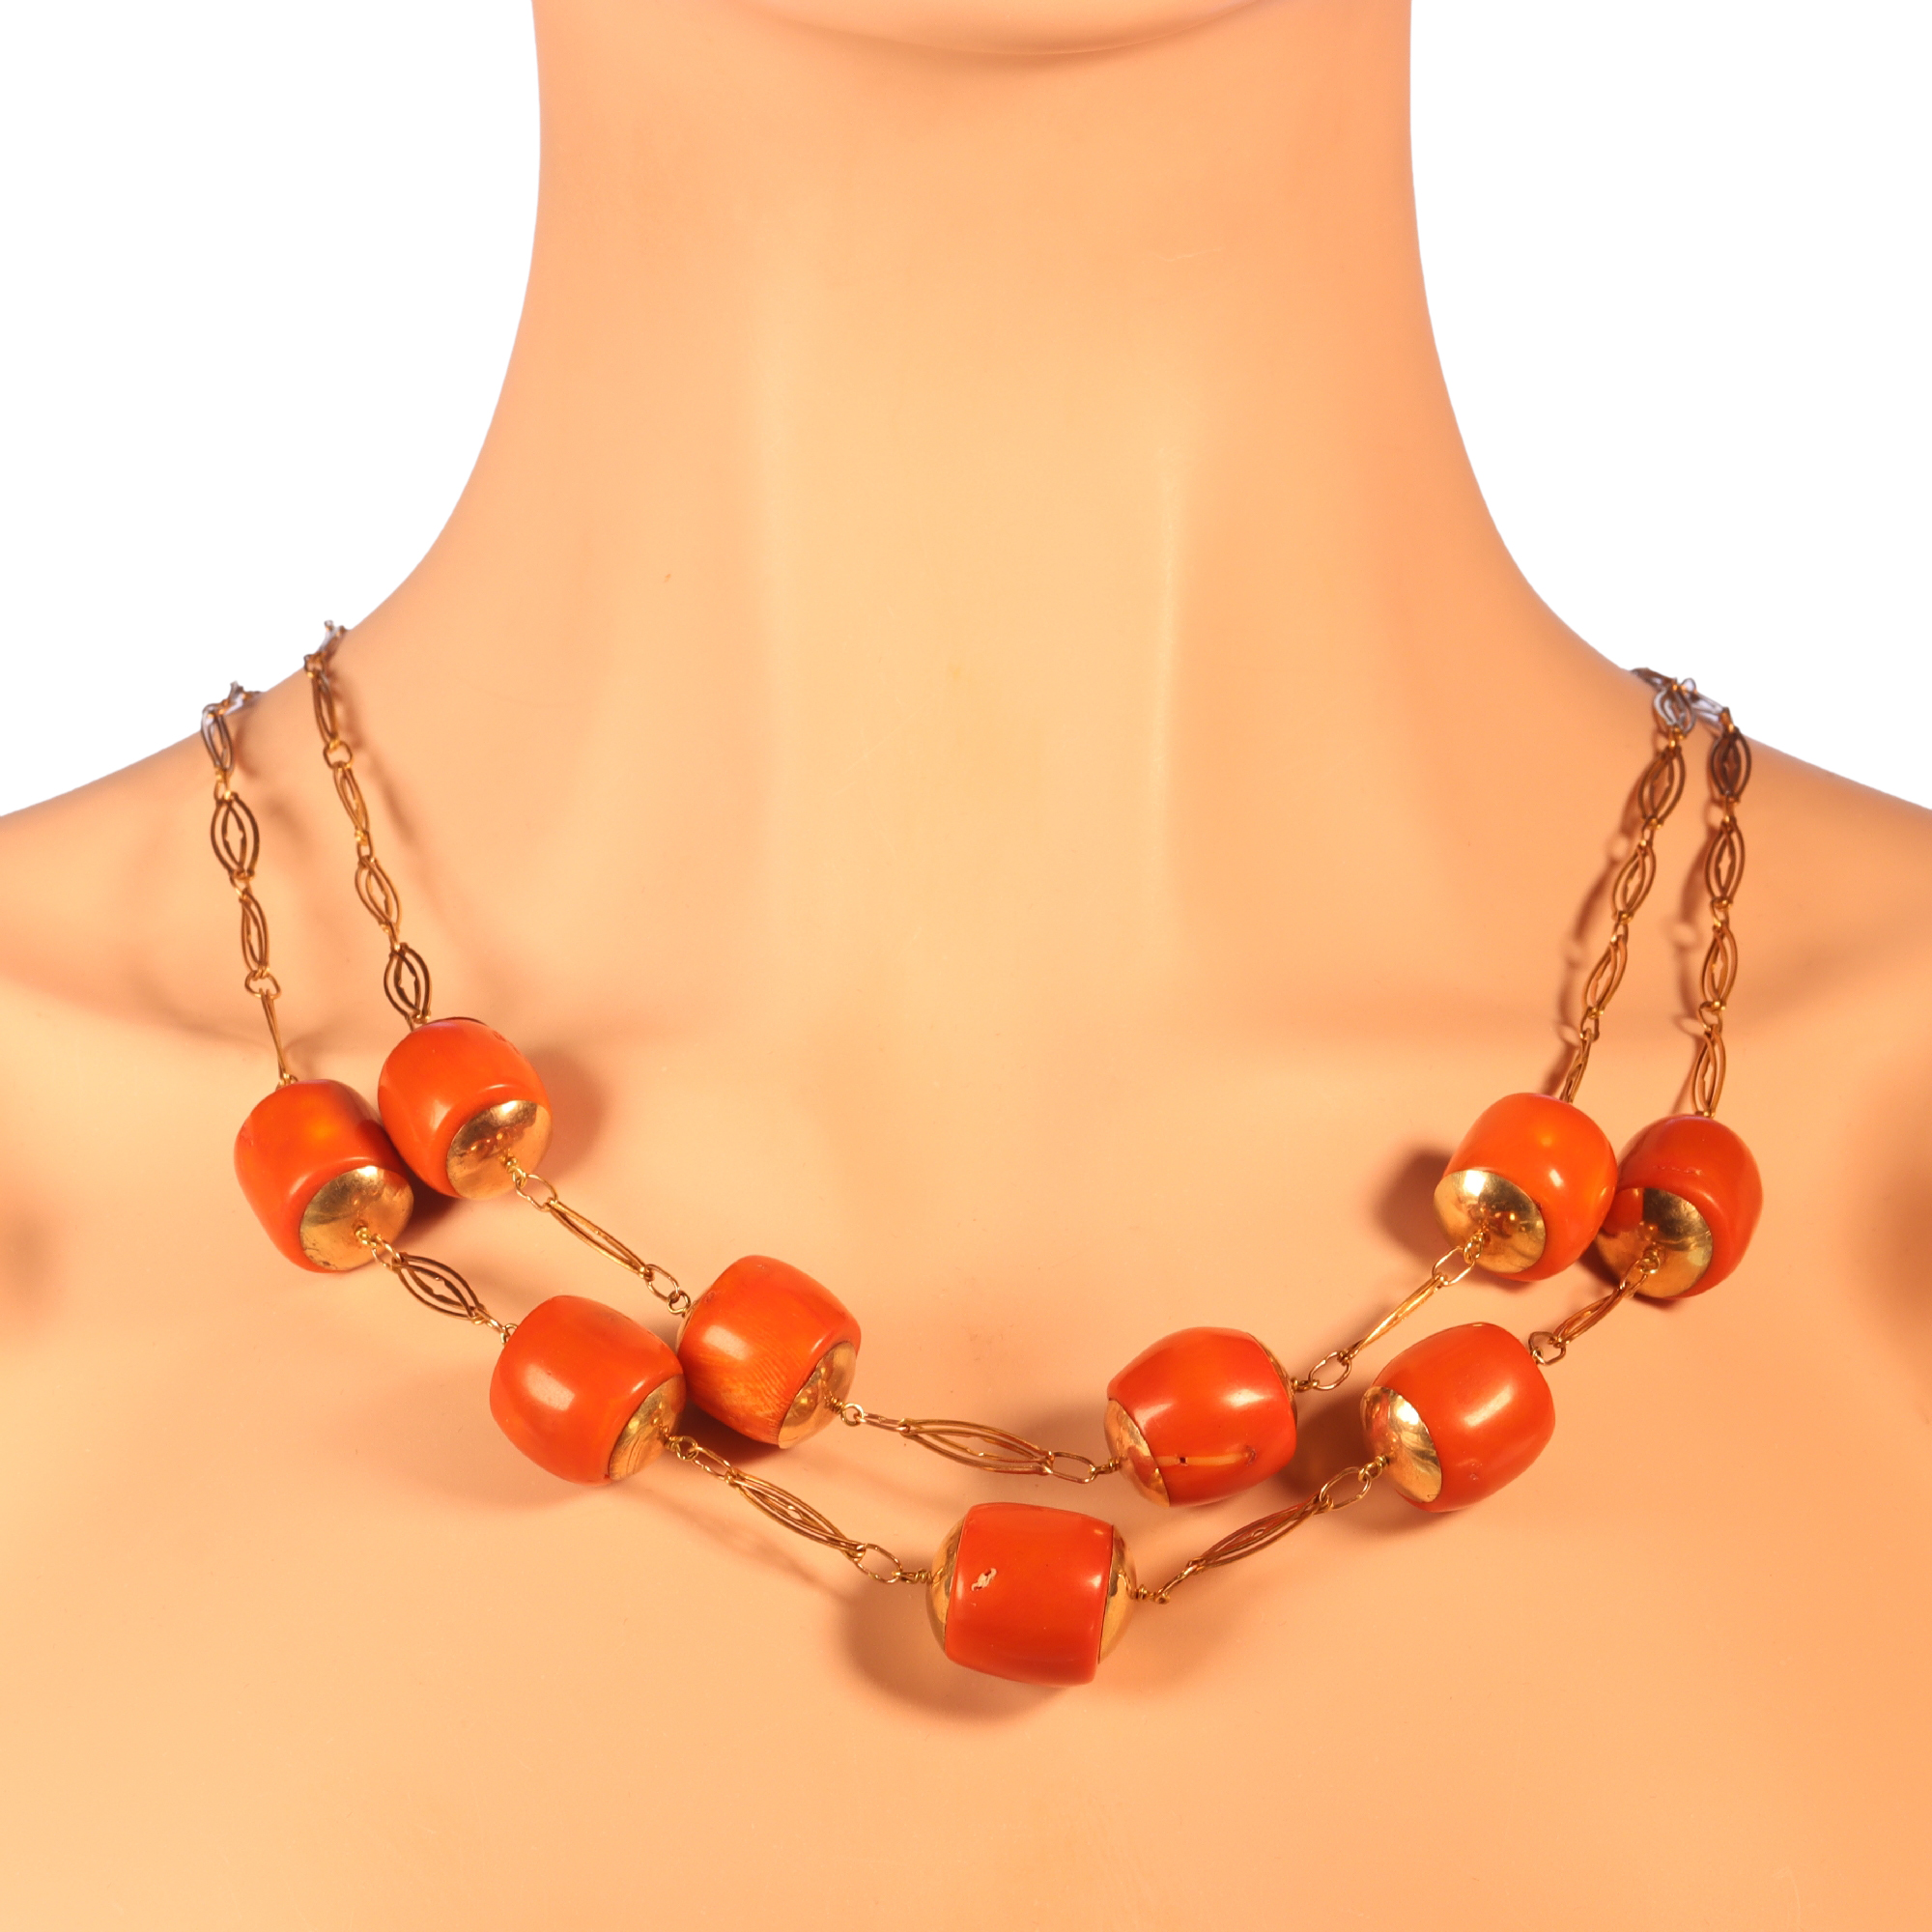 Grandiose Beads: A Monumental Coral Necklace